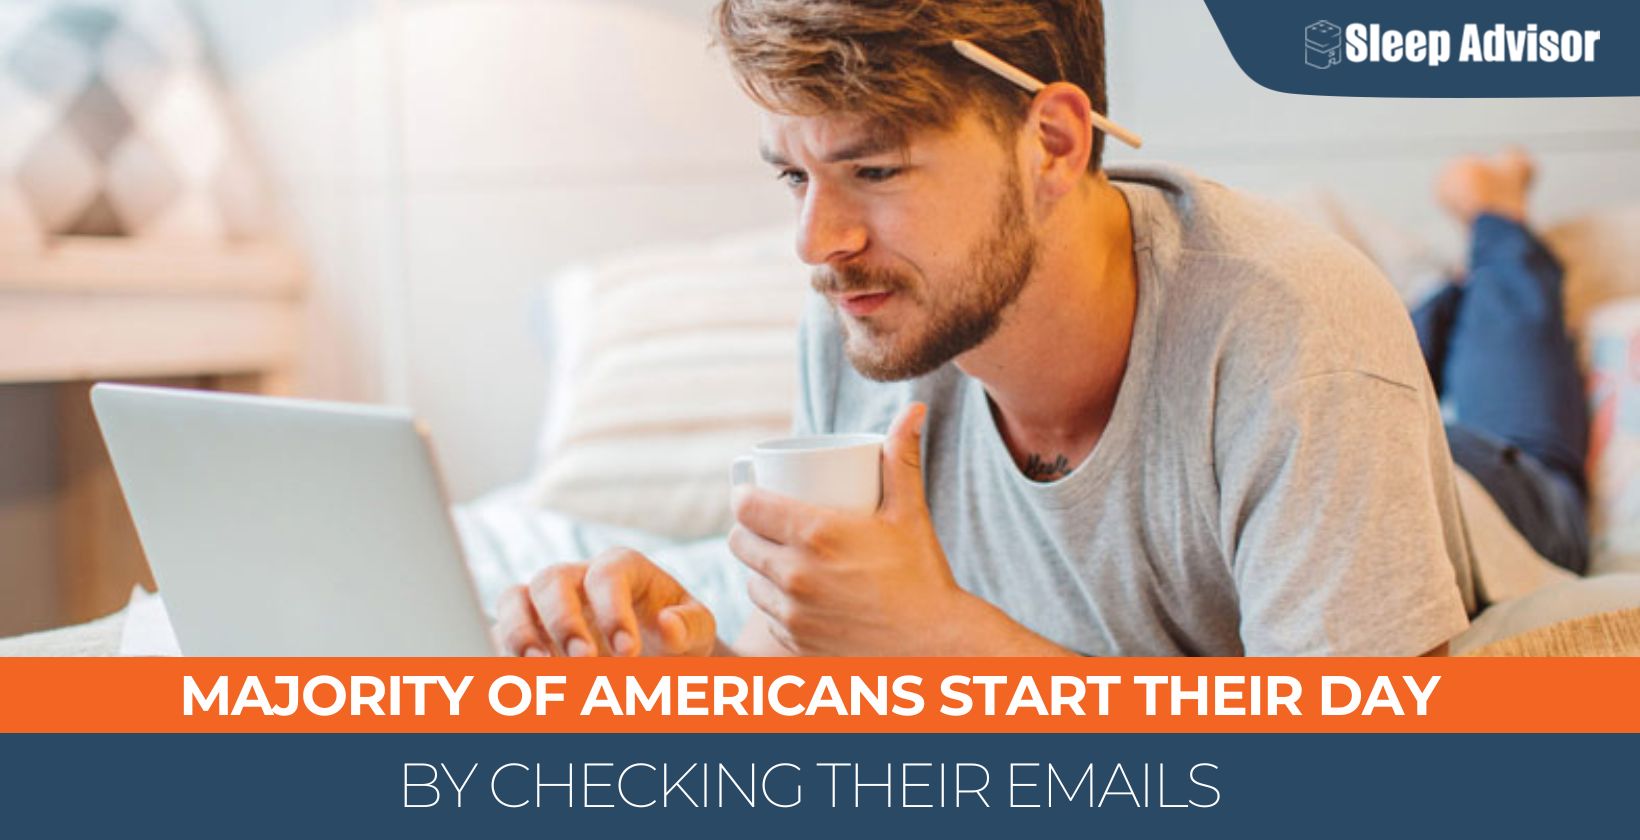 Majority of Americans Start Their Day by Checking Their Emails